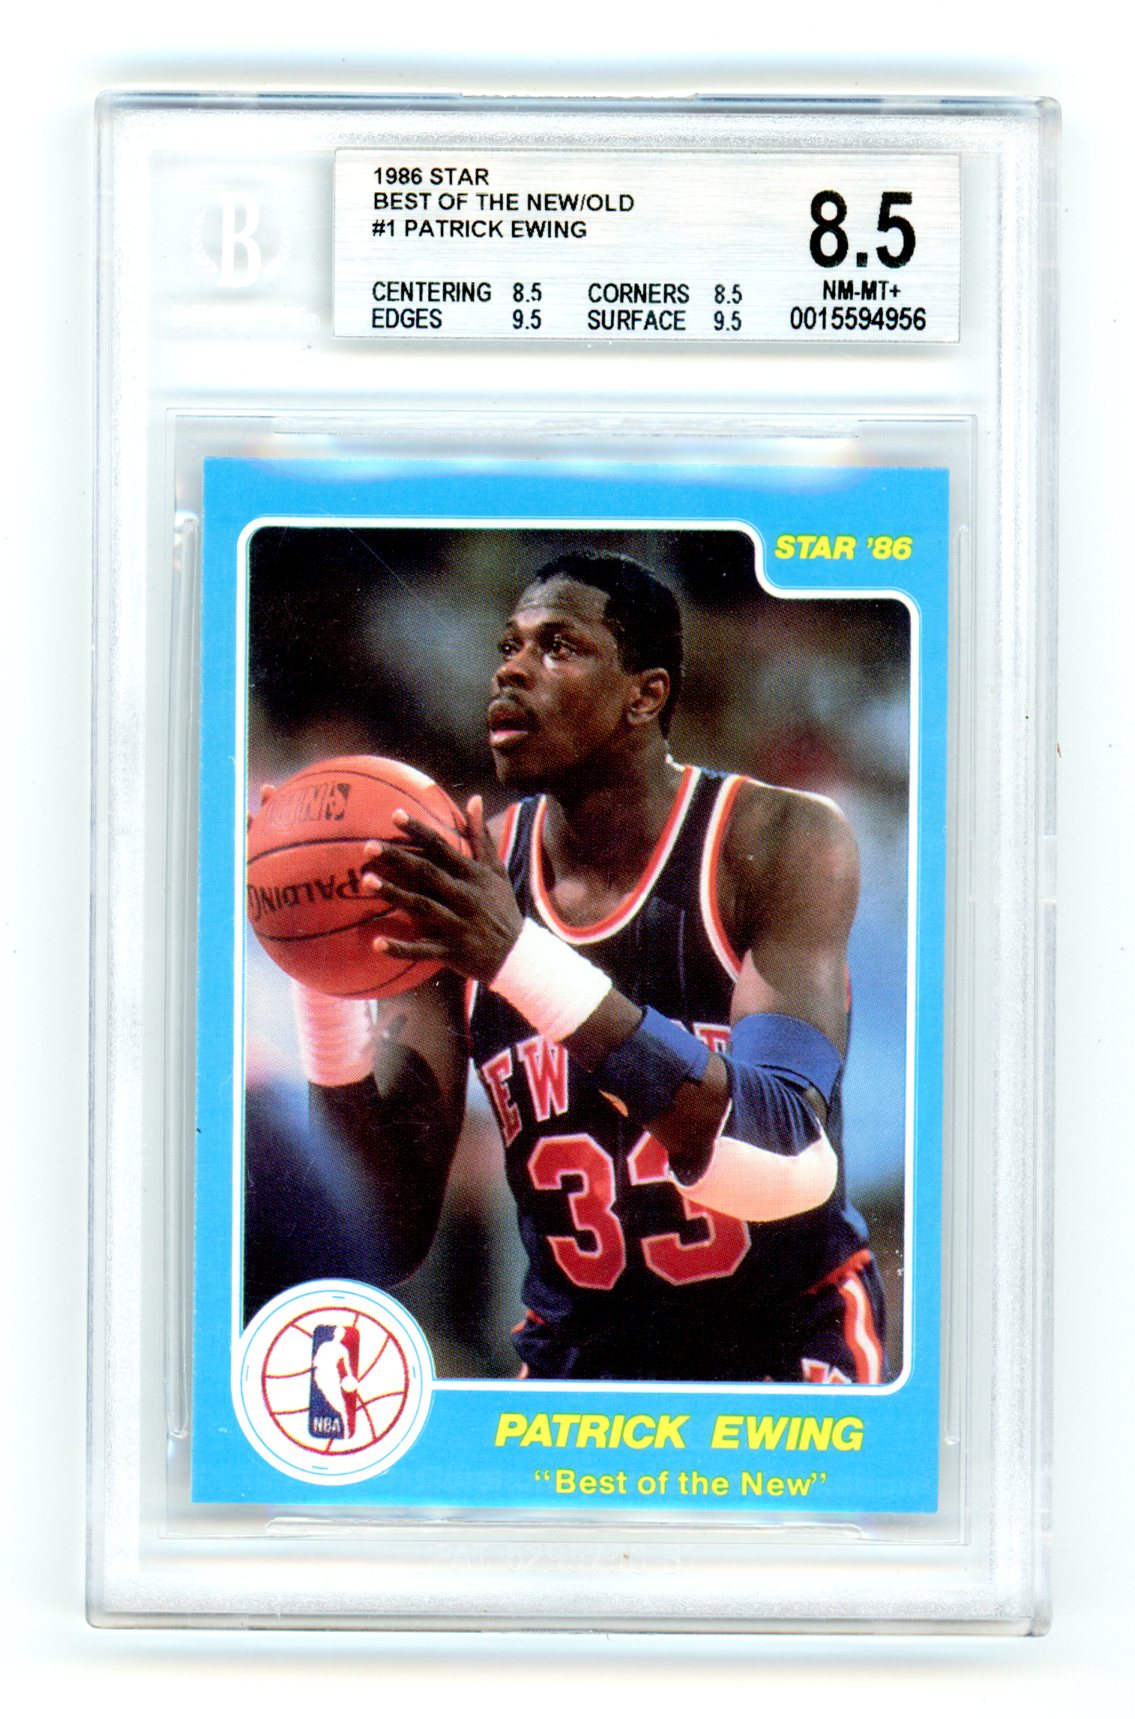 1986 Star Best of the New/Old #1 Patrick Ewing BGS 8.5 NM-MT+